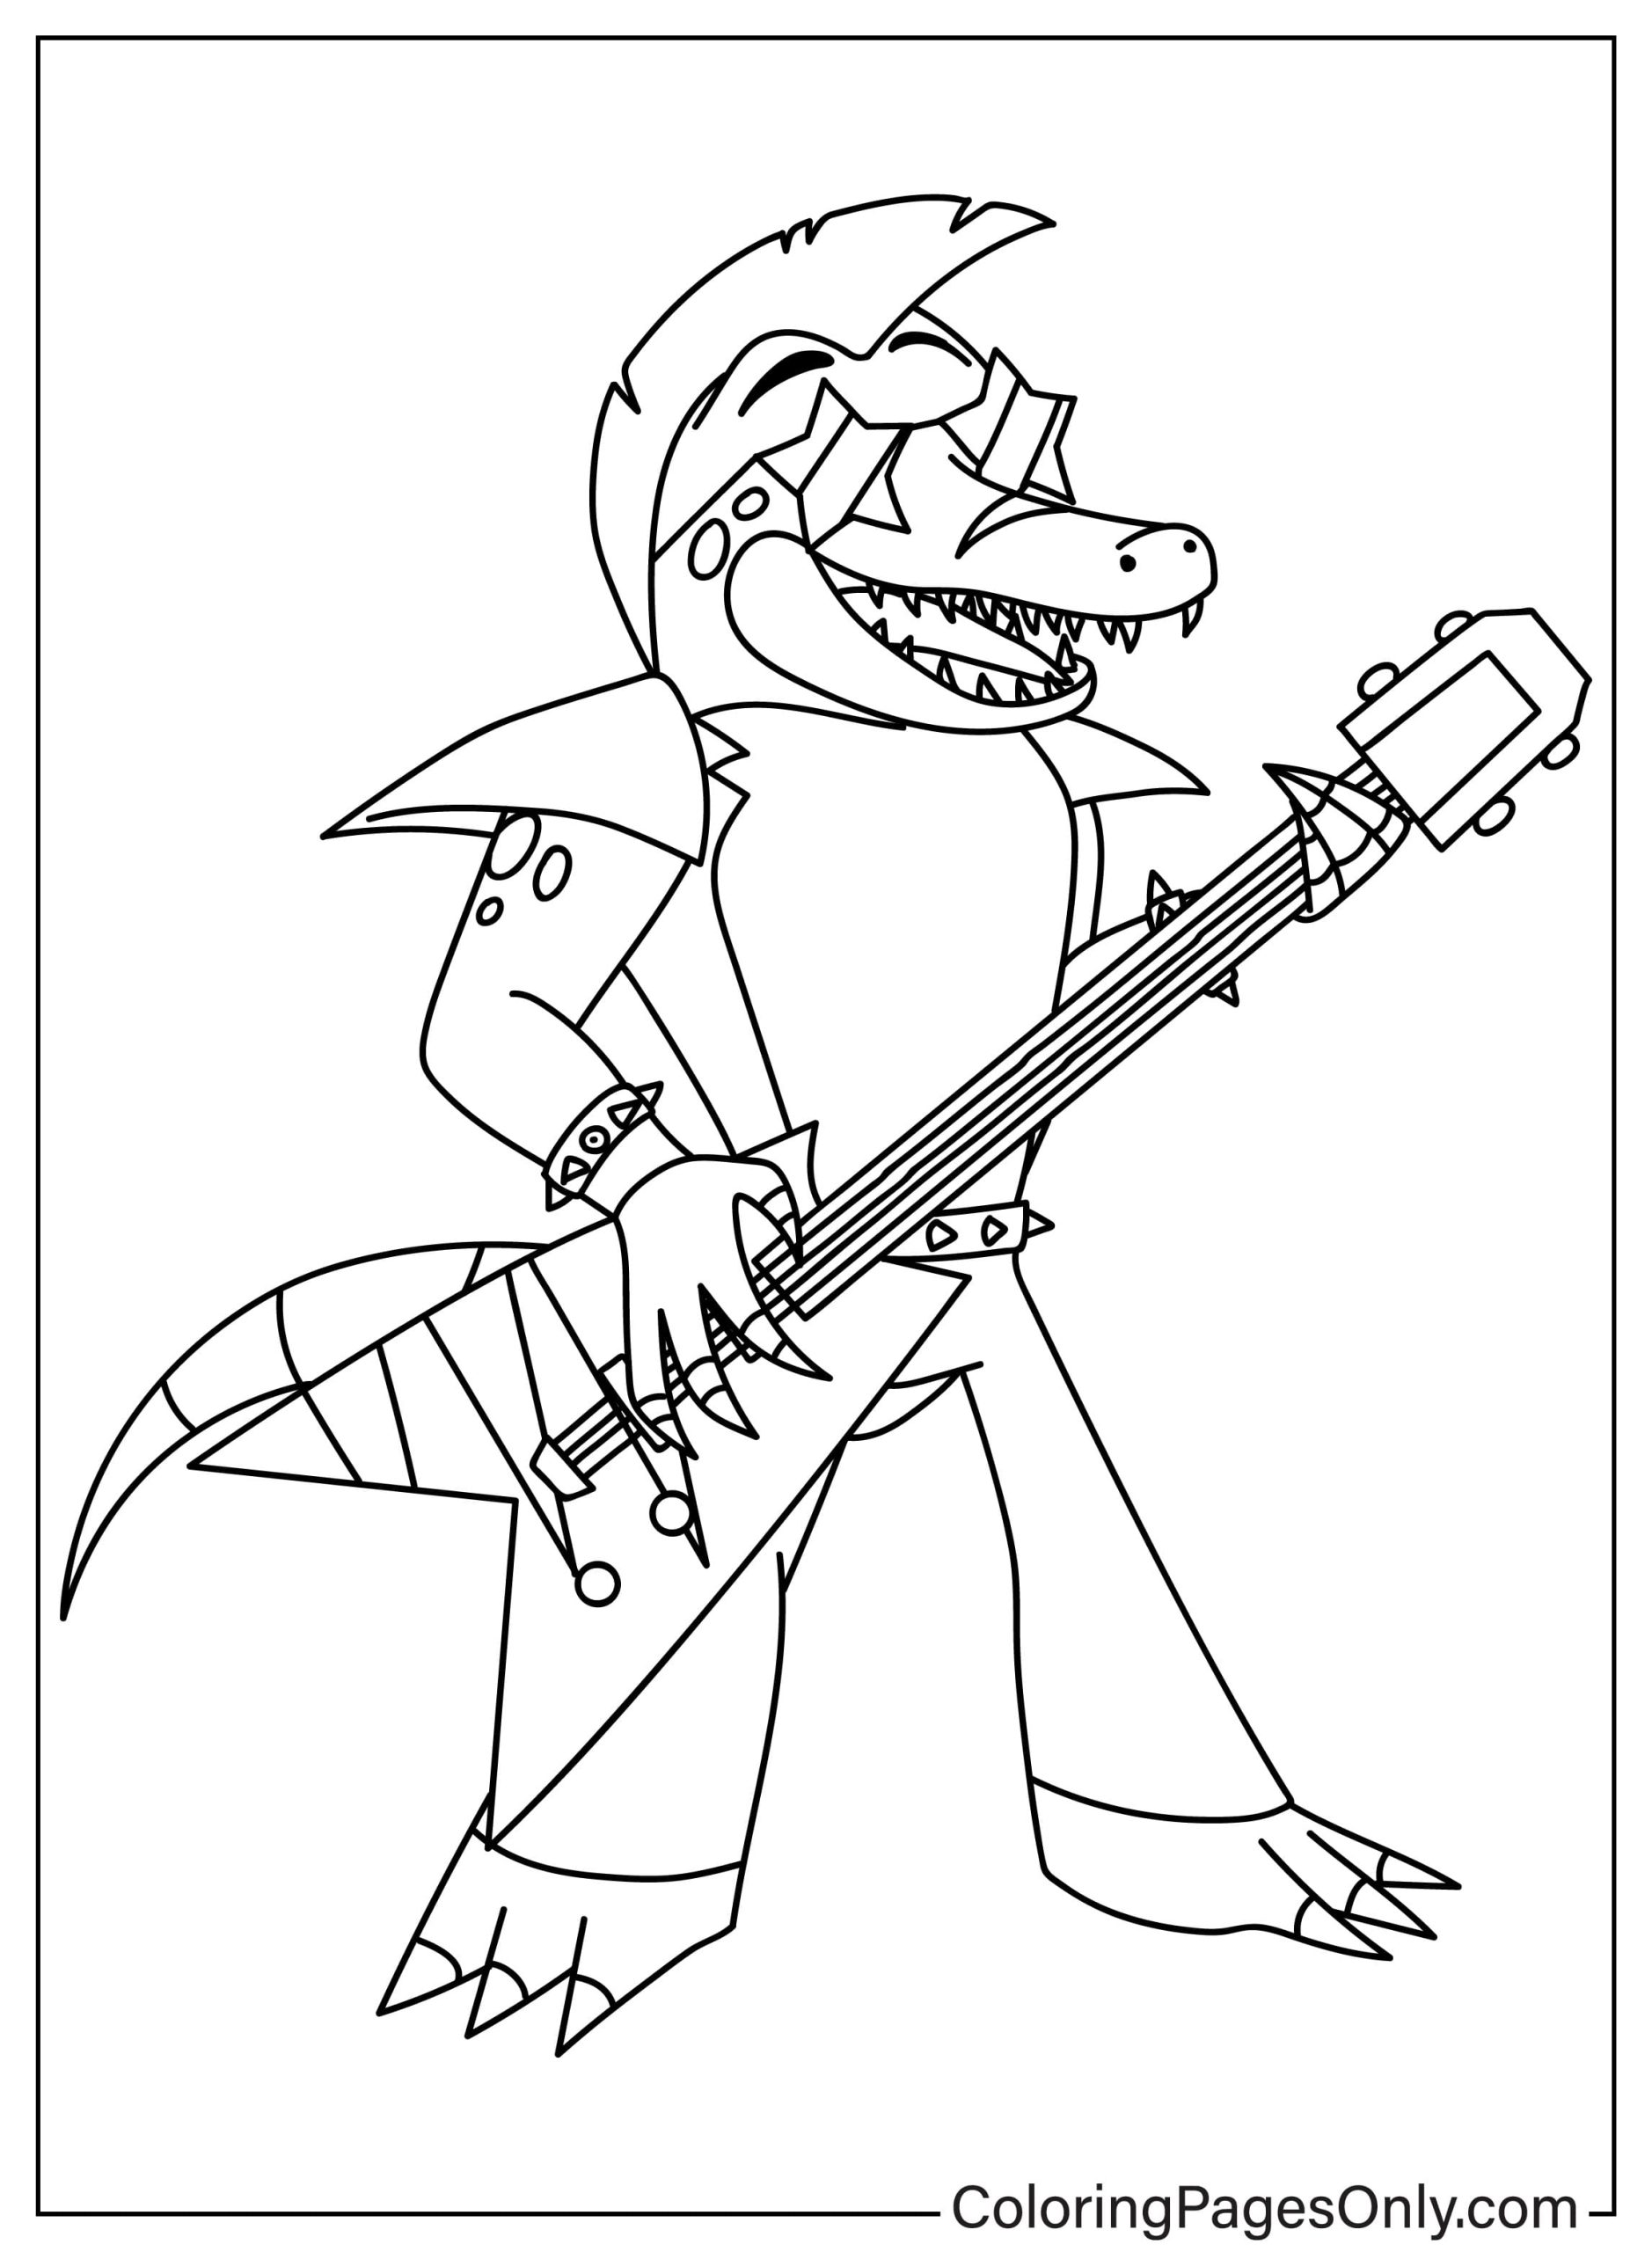 Montgomery Gator Coloring Page to Print